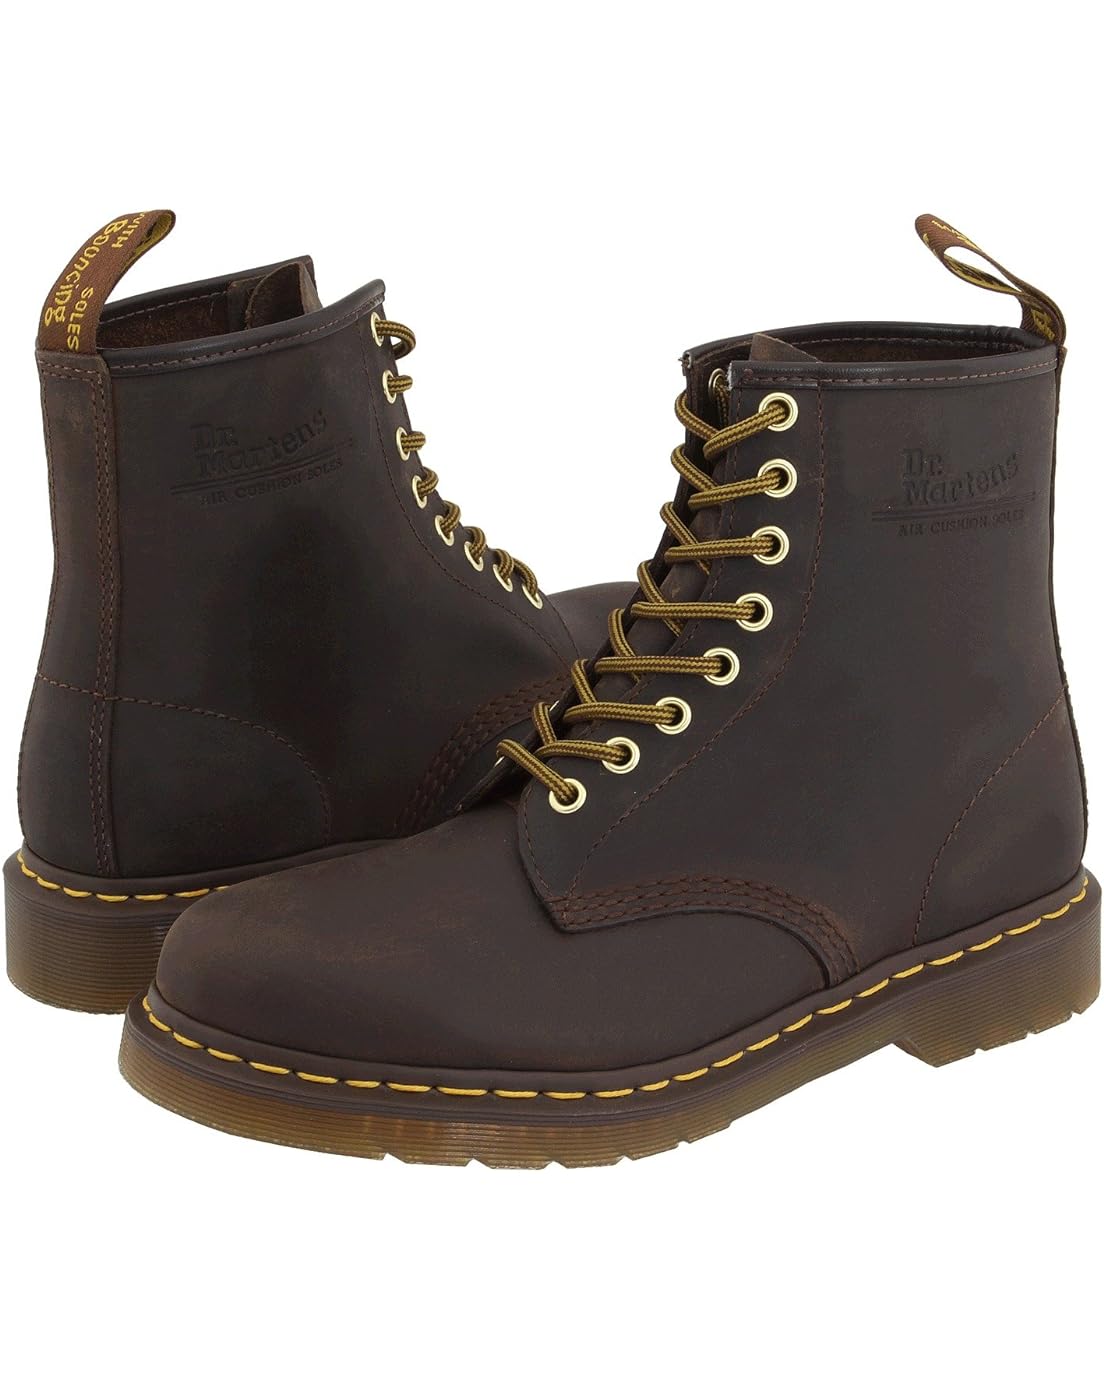 Dr. Martens 1460 Crazy Horse Leather Boots